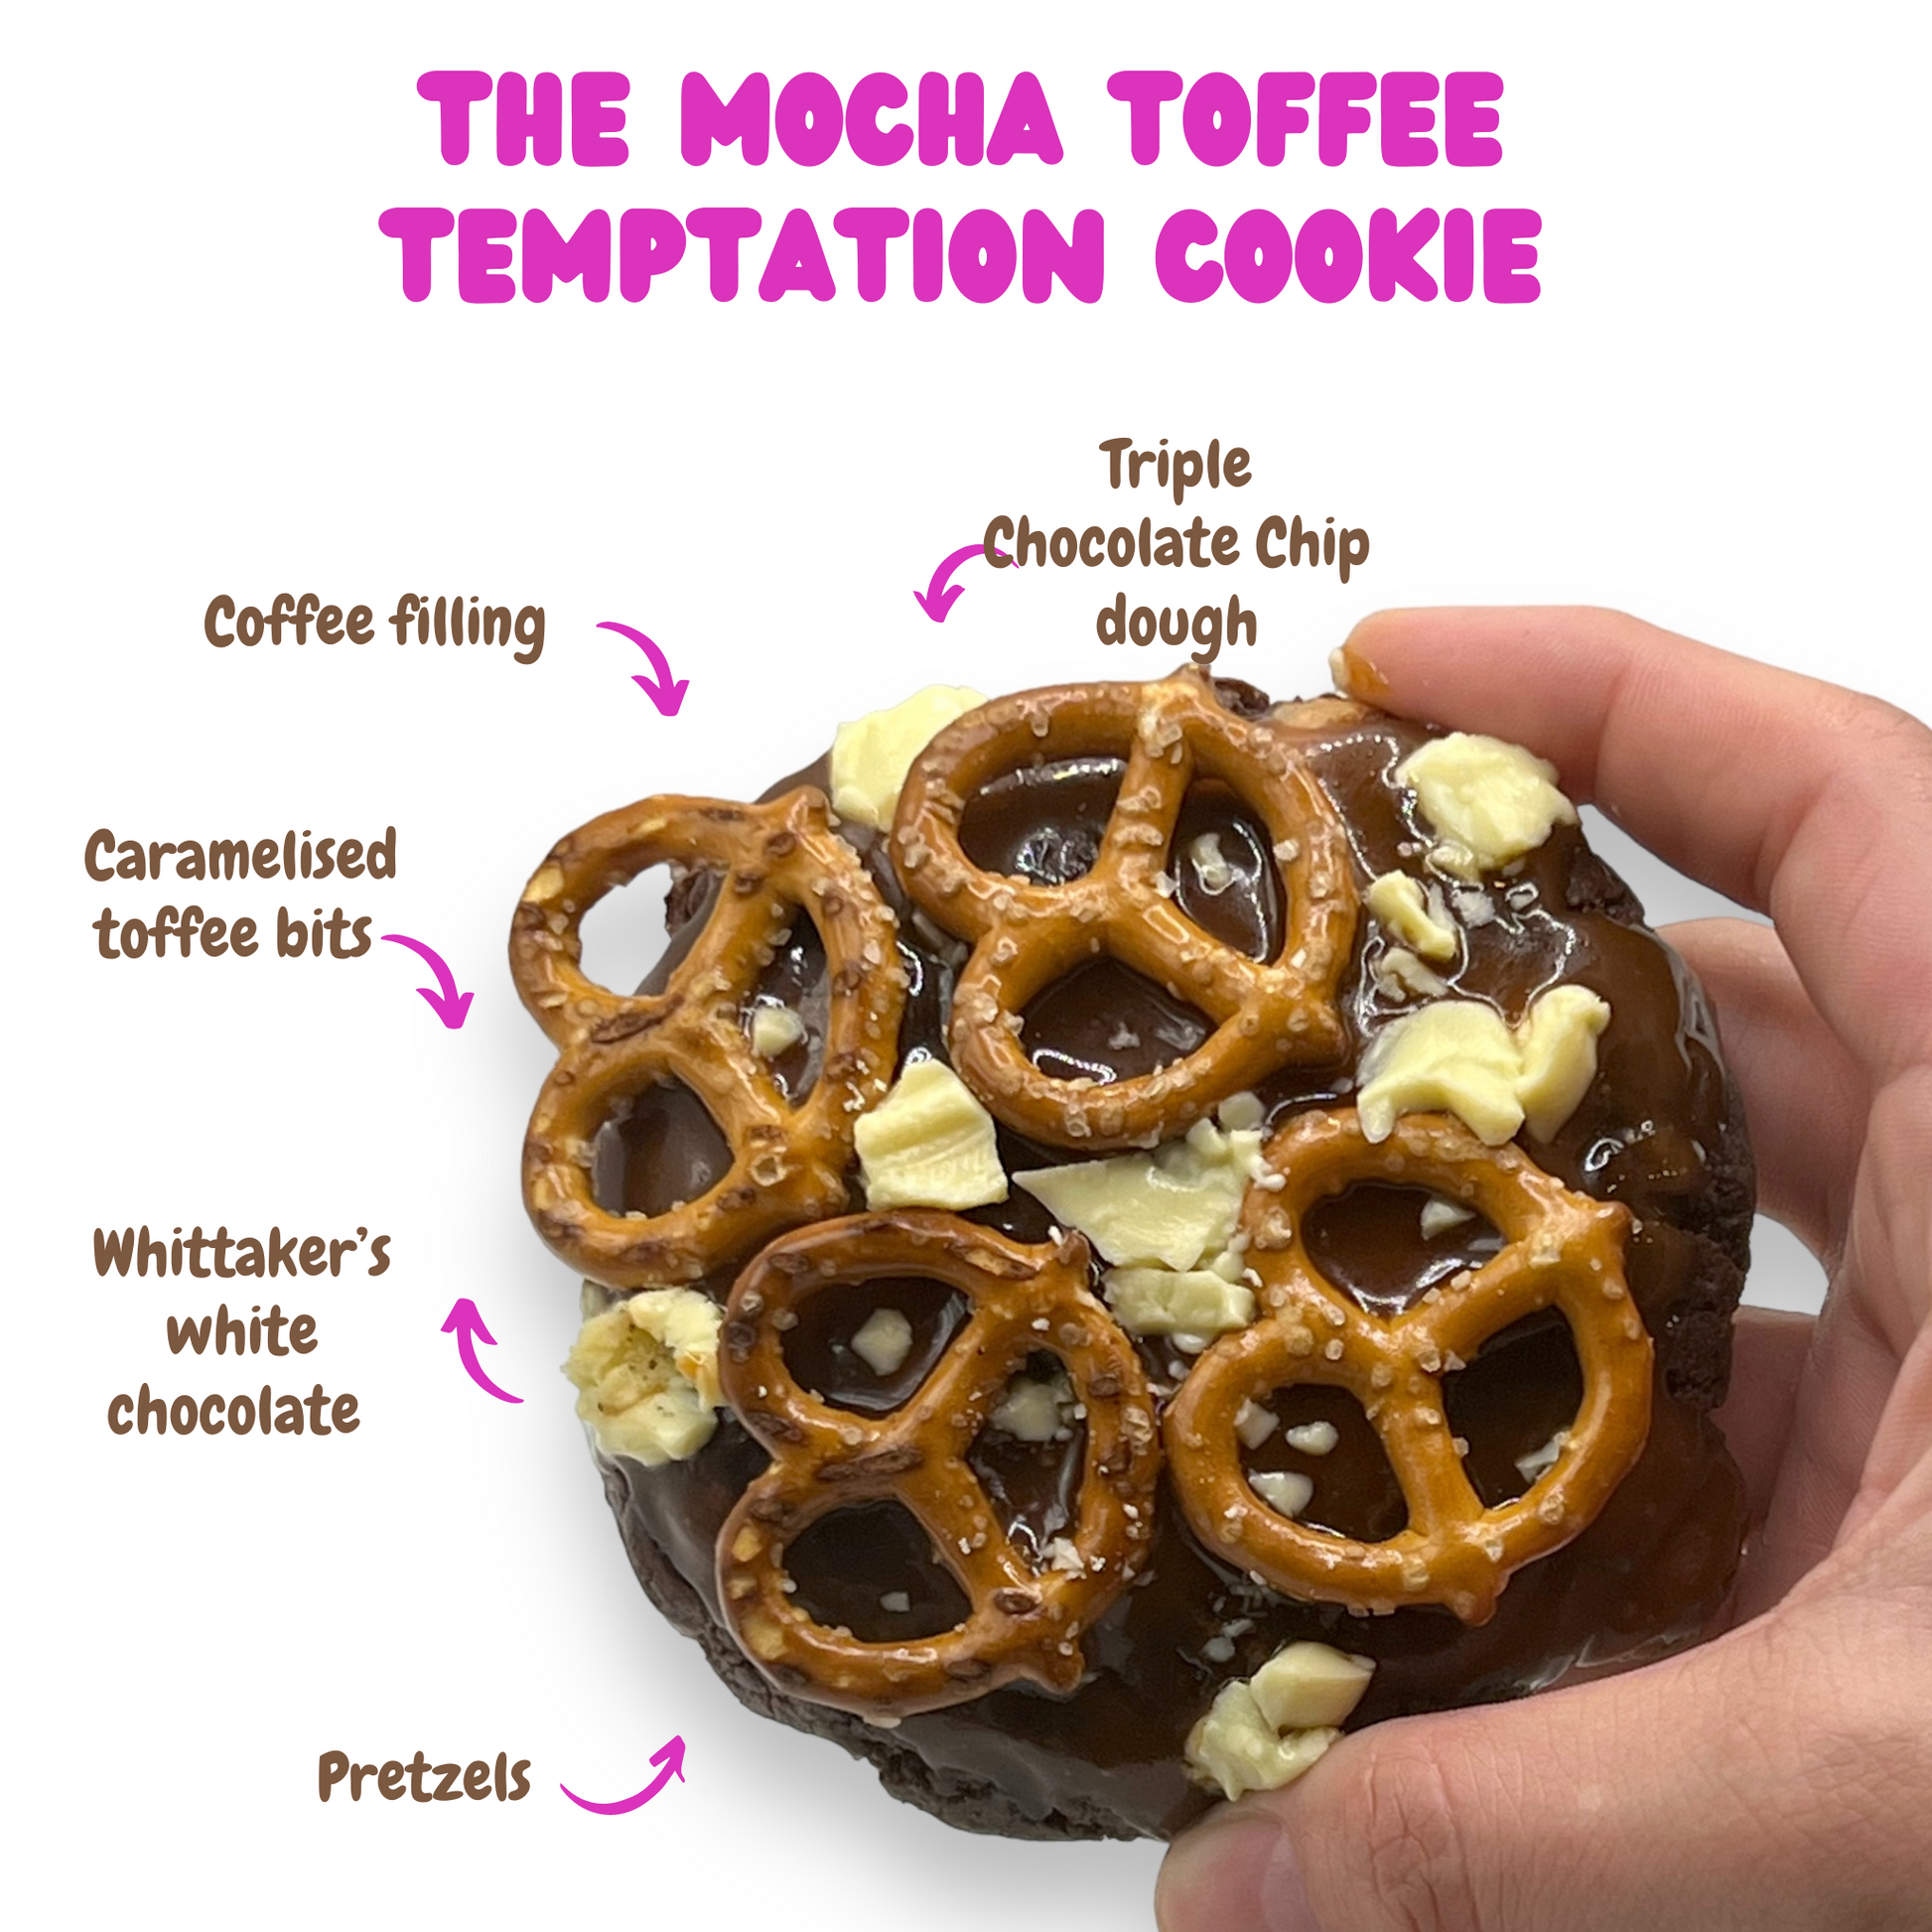  freshly baked Mocha Toffee Temptation Cookies, ready to indulge your sweet cravings